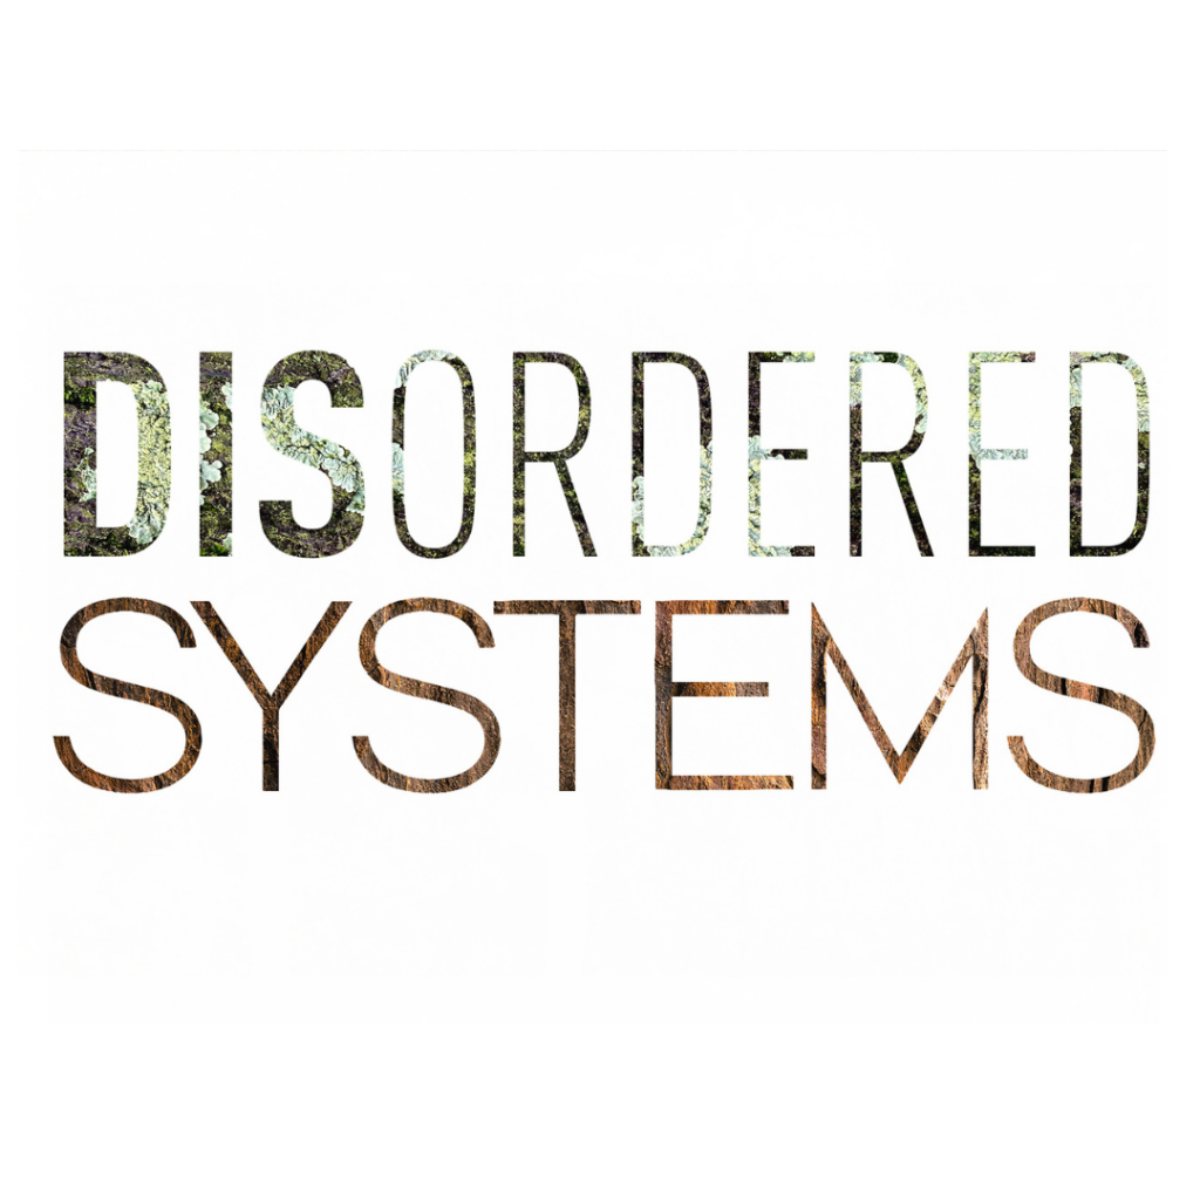 Exhibition: DISordered Systems